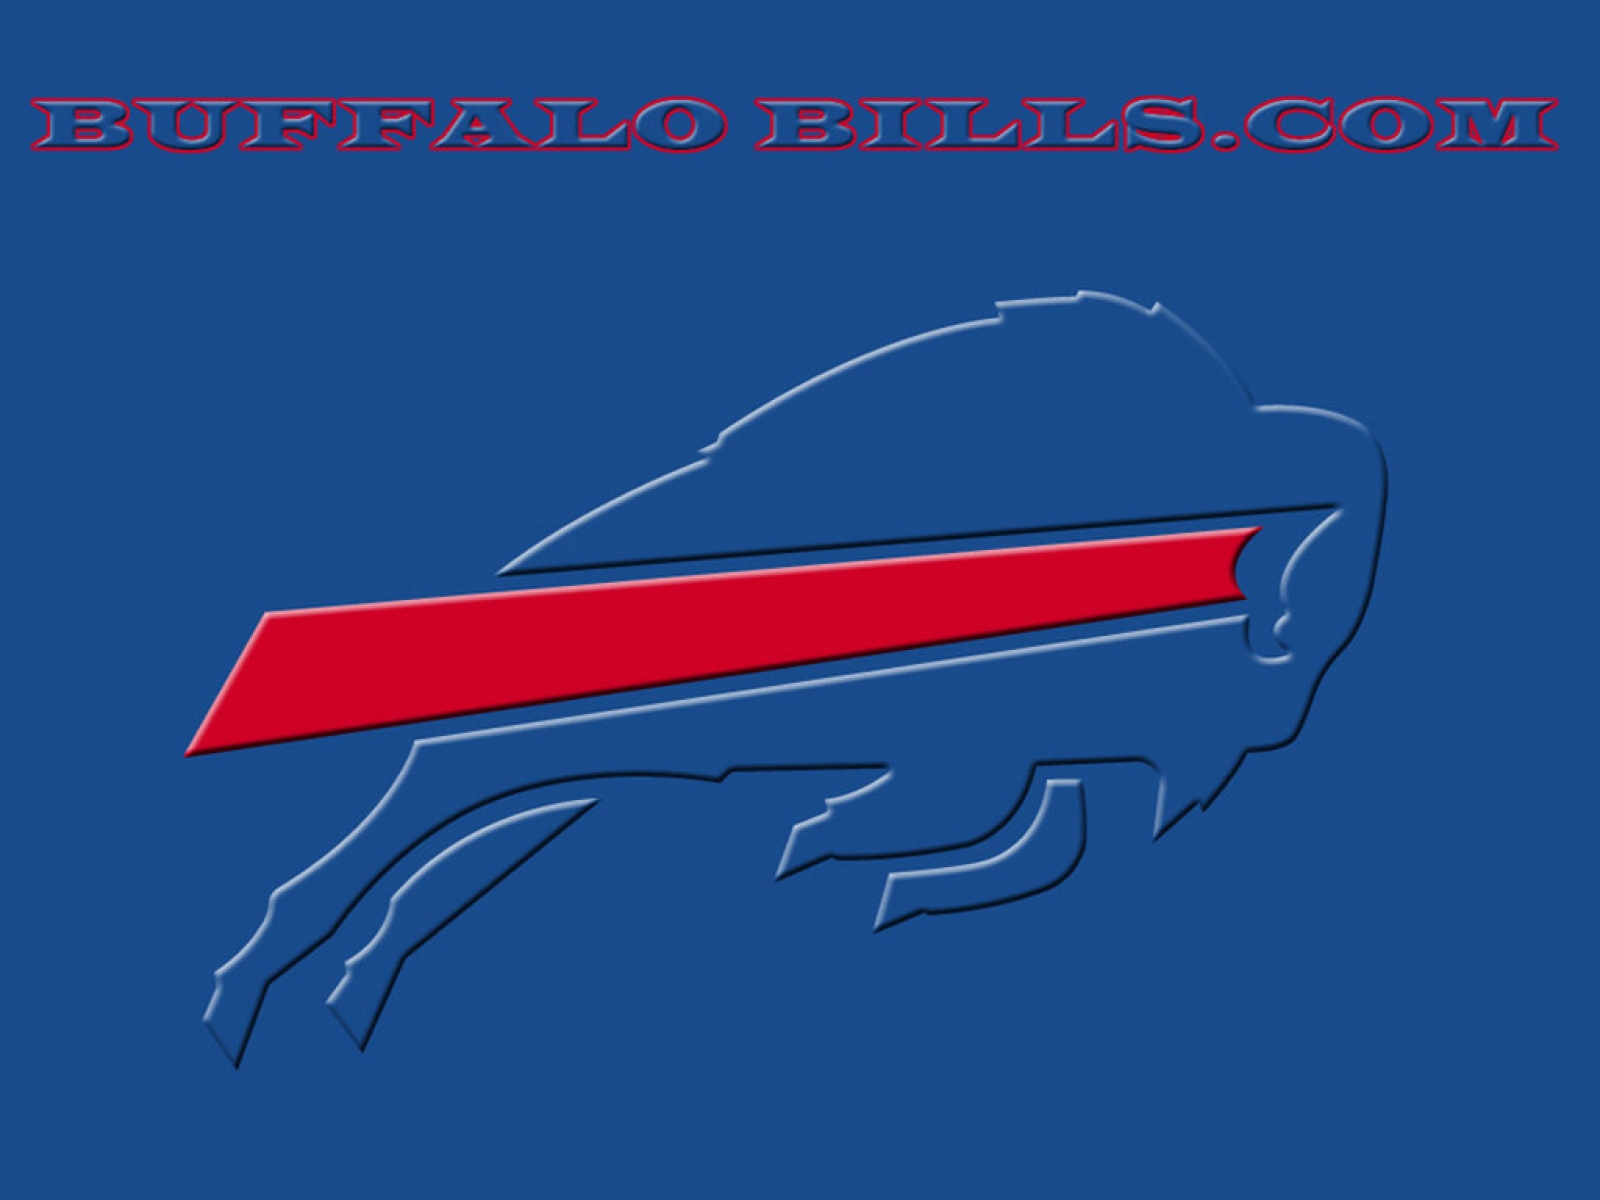 You Like This Buffalo Bills Wallpaper HD Background As Much We Do